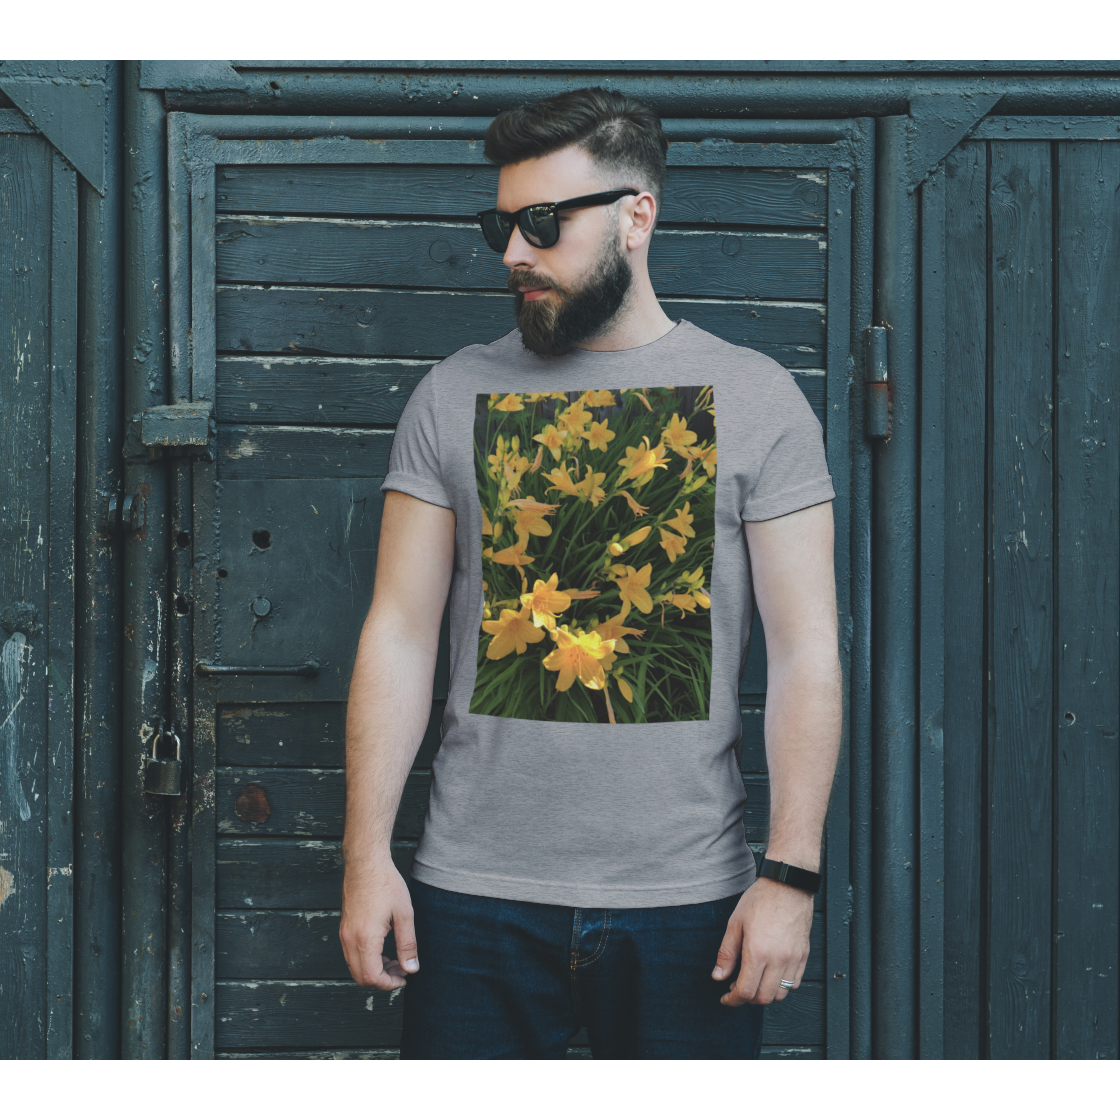 T-Shirt for Women and Men with Yellow Lily Picture, Male Front